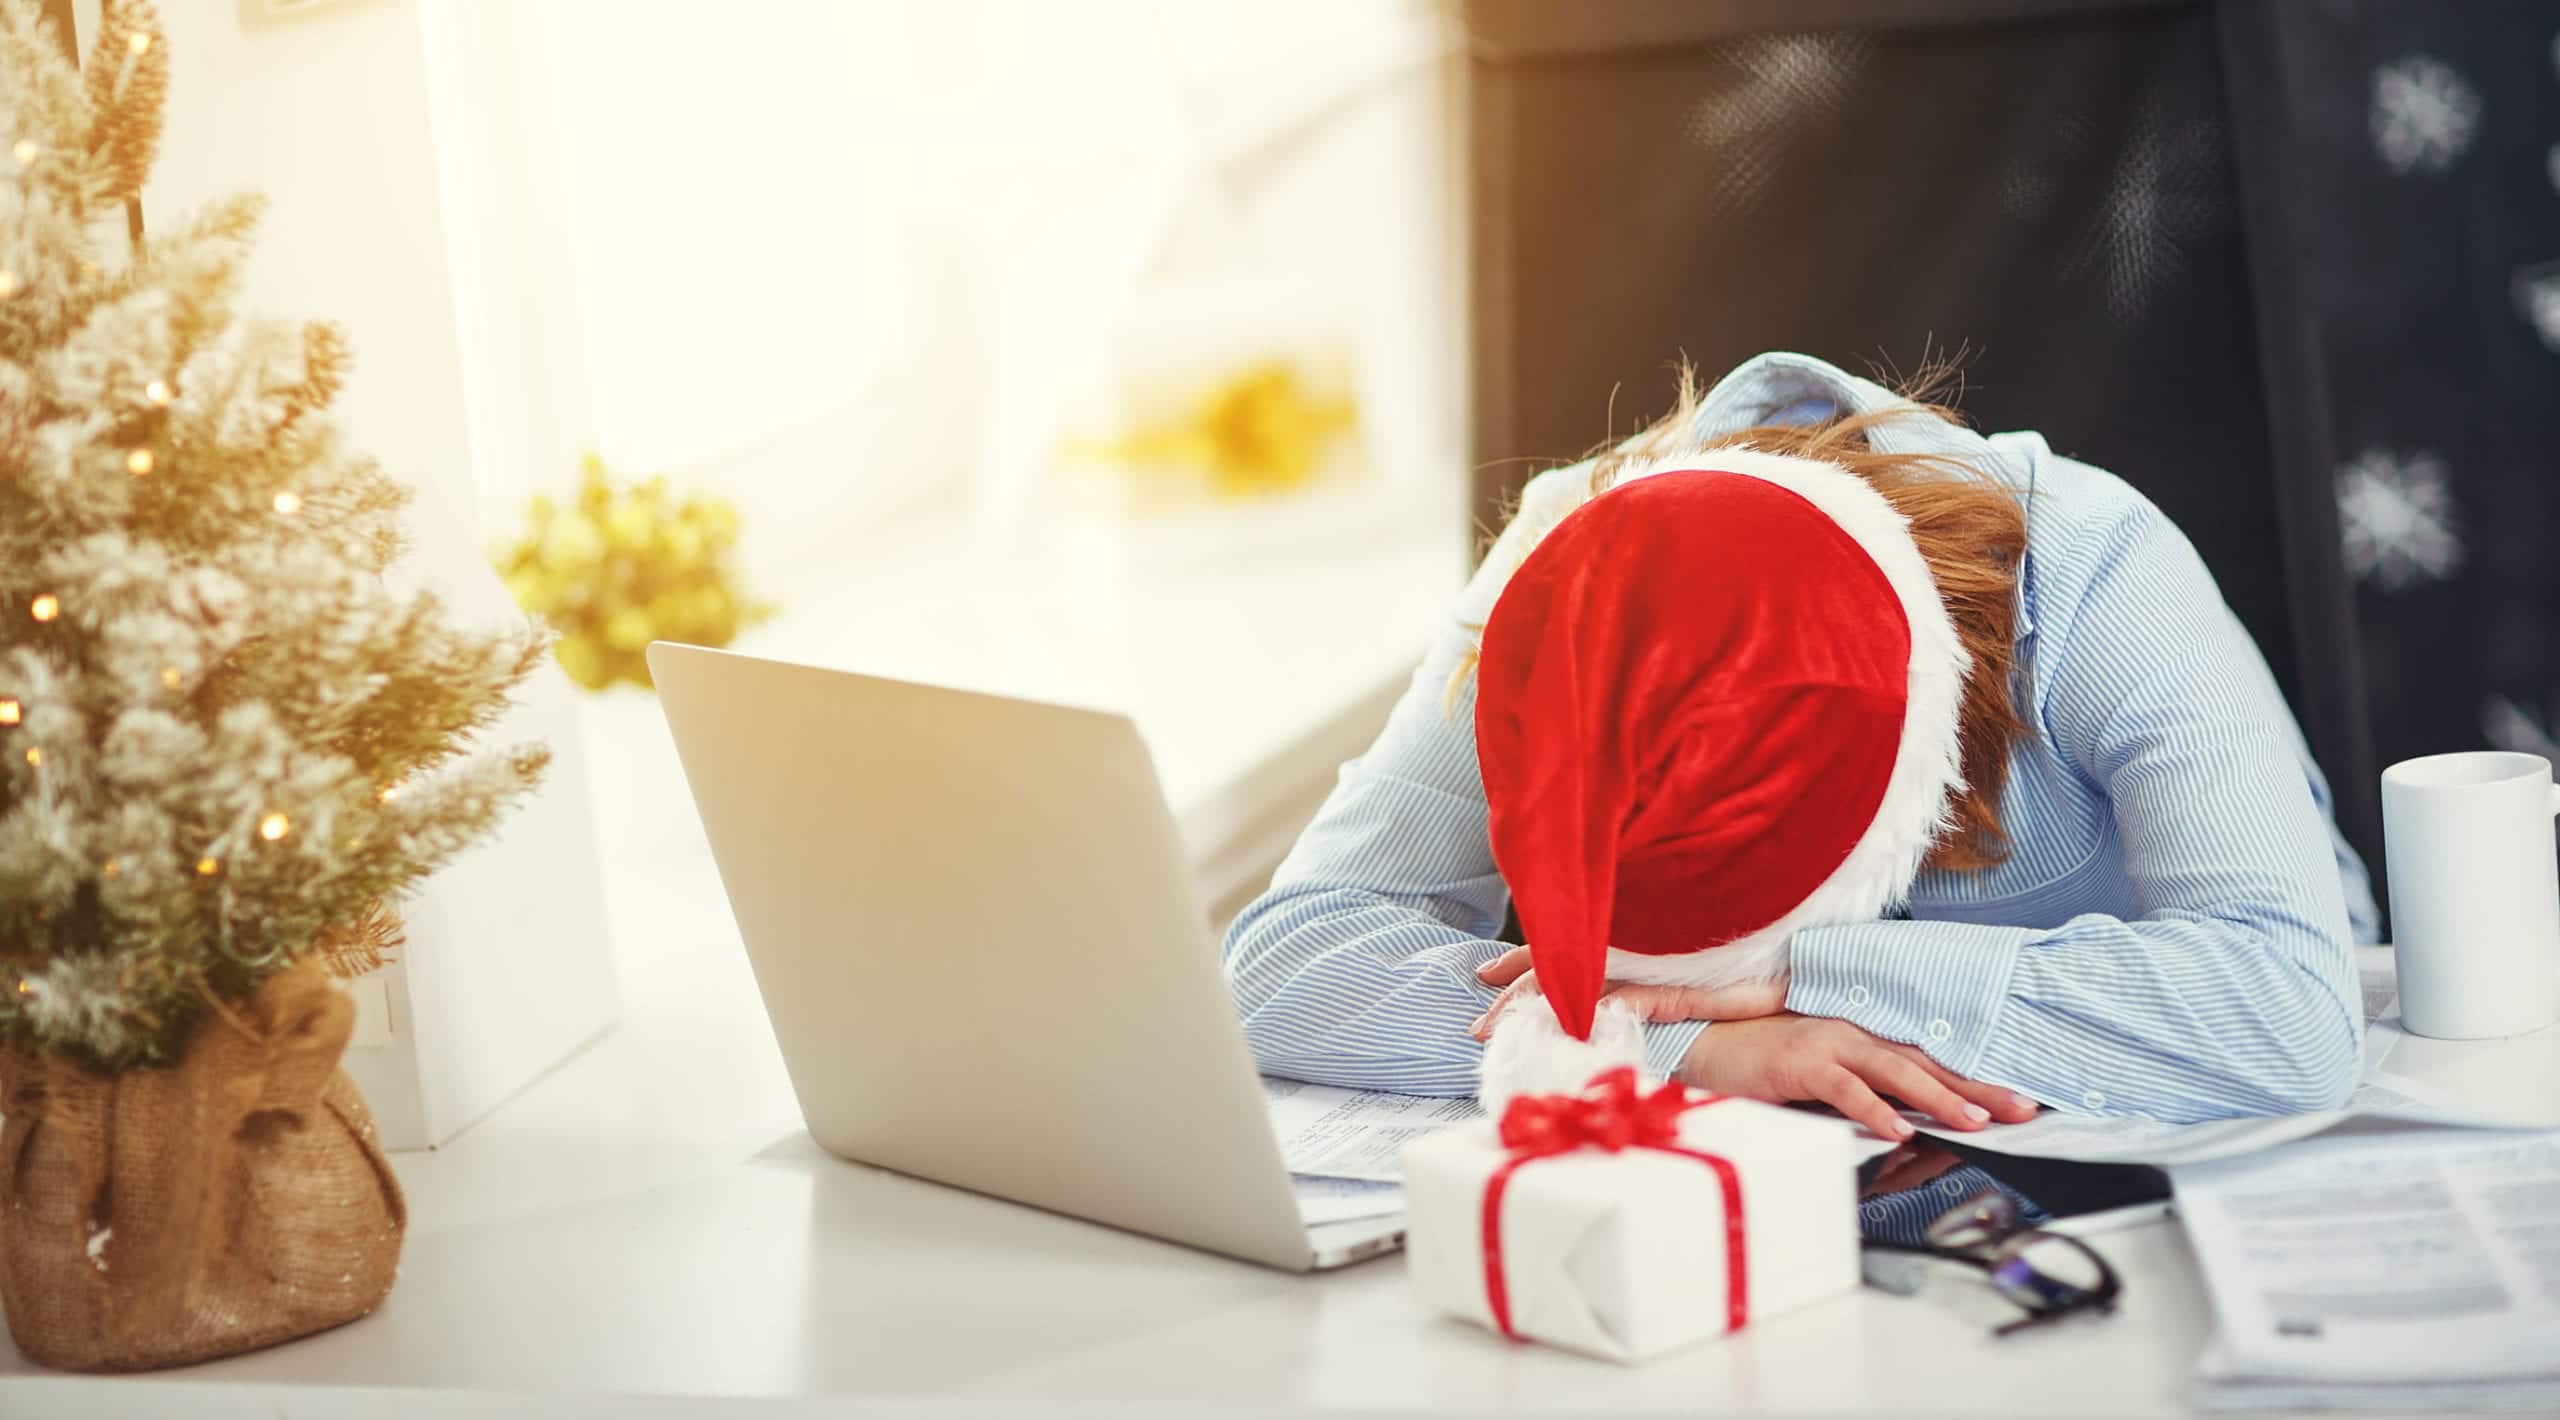 Office Holiday Party Regret - Avoid It and Maintain Your Reputation